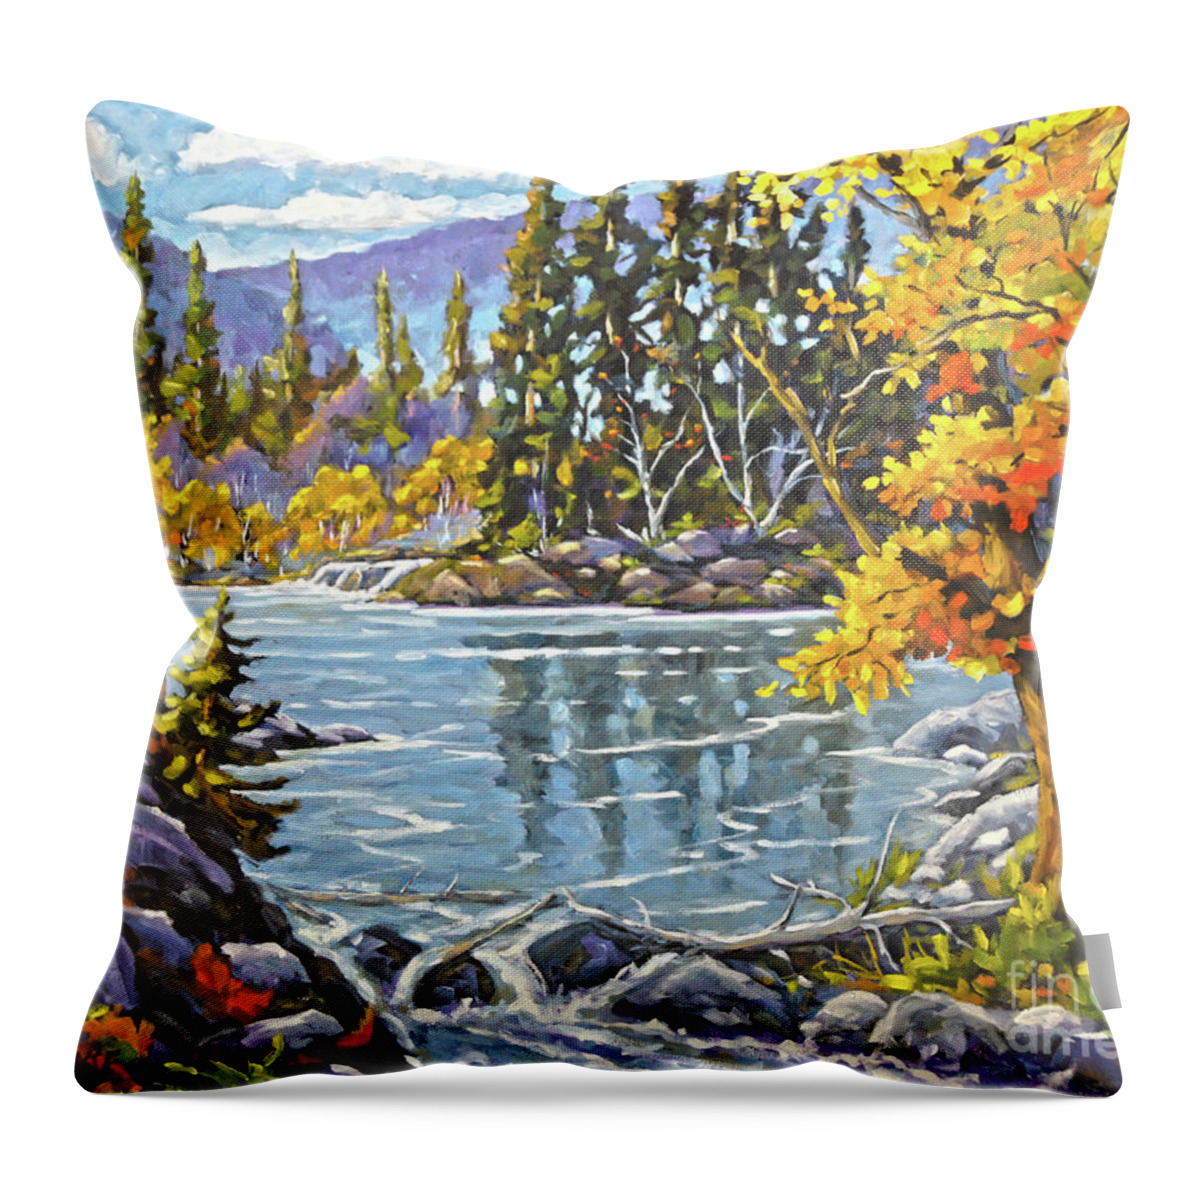 Charlevoix Landscape Scene Throw Pillow featuring the painting Great Canadian Lake - Large Original Oil Painting by Richard T Pranke